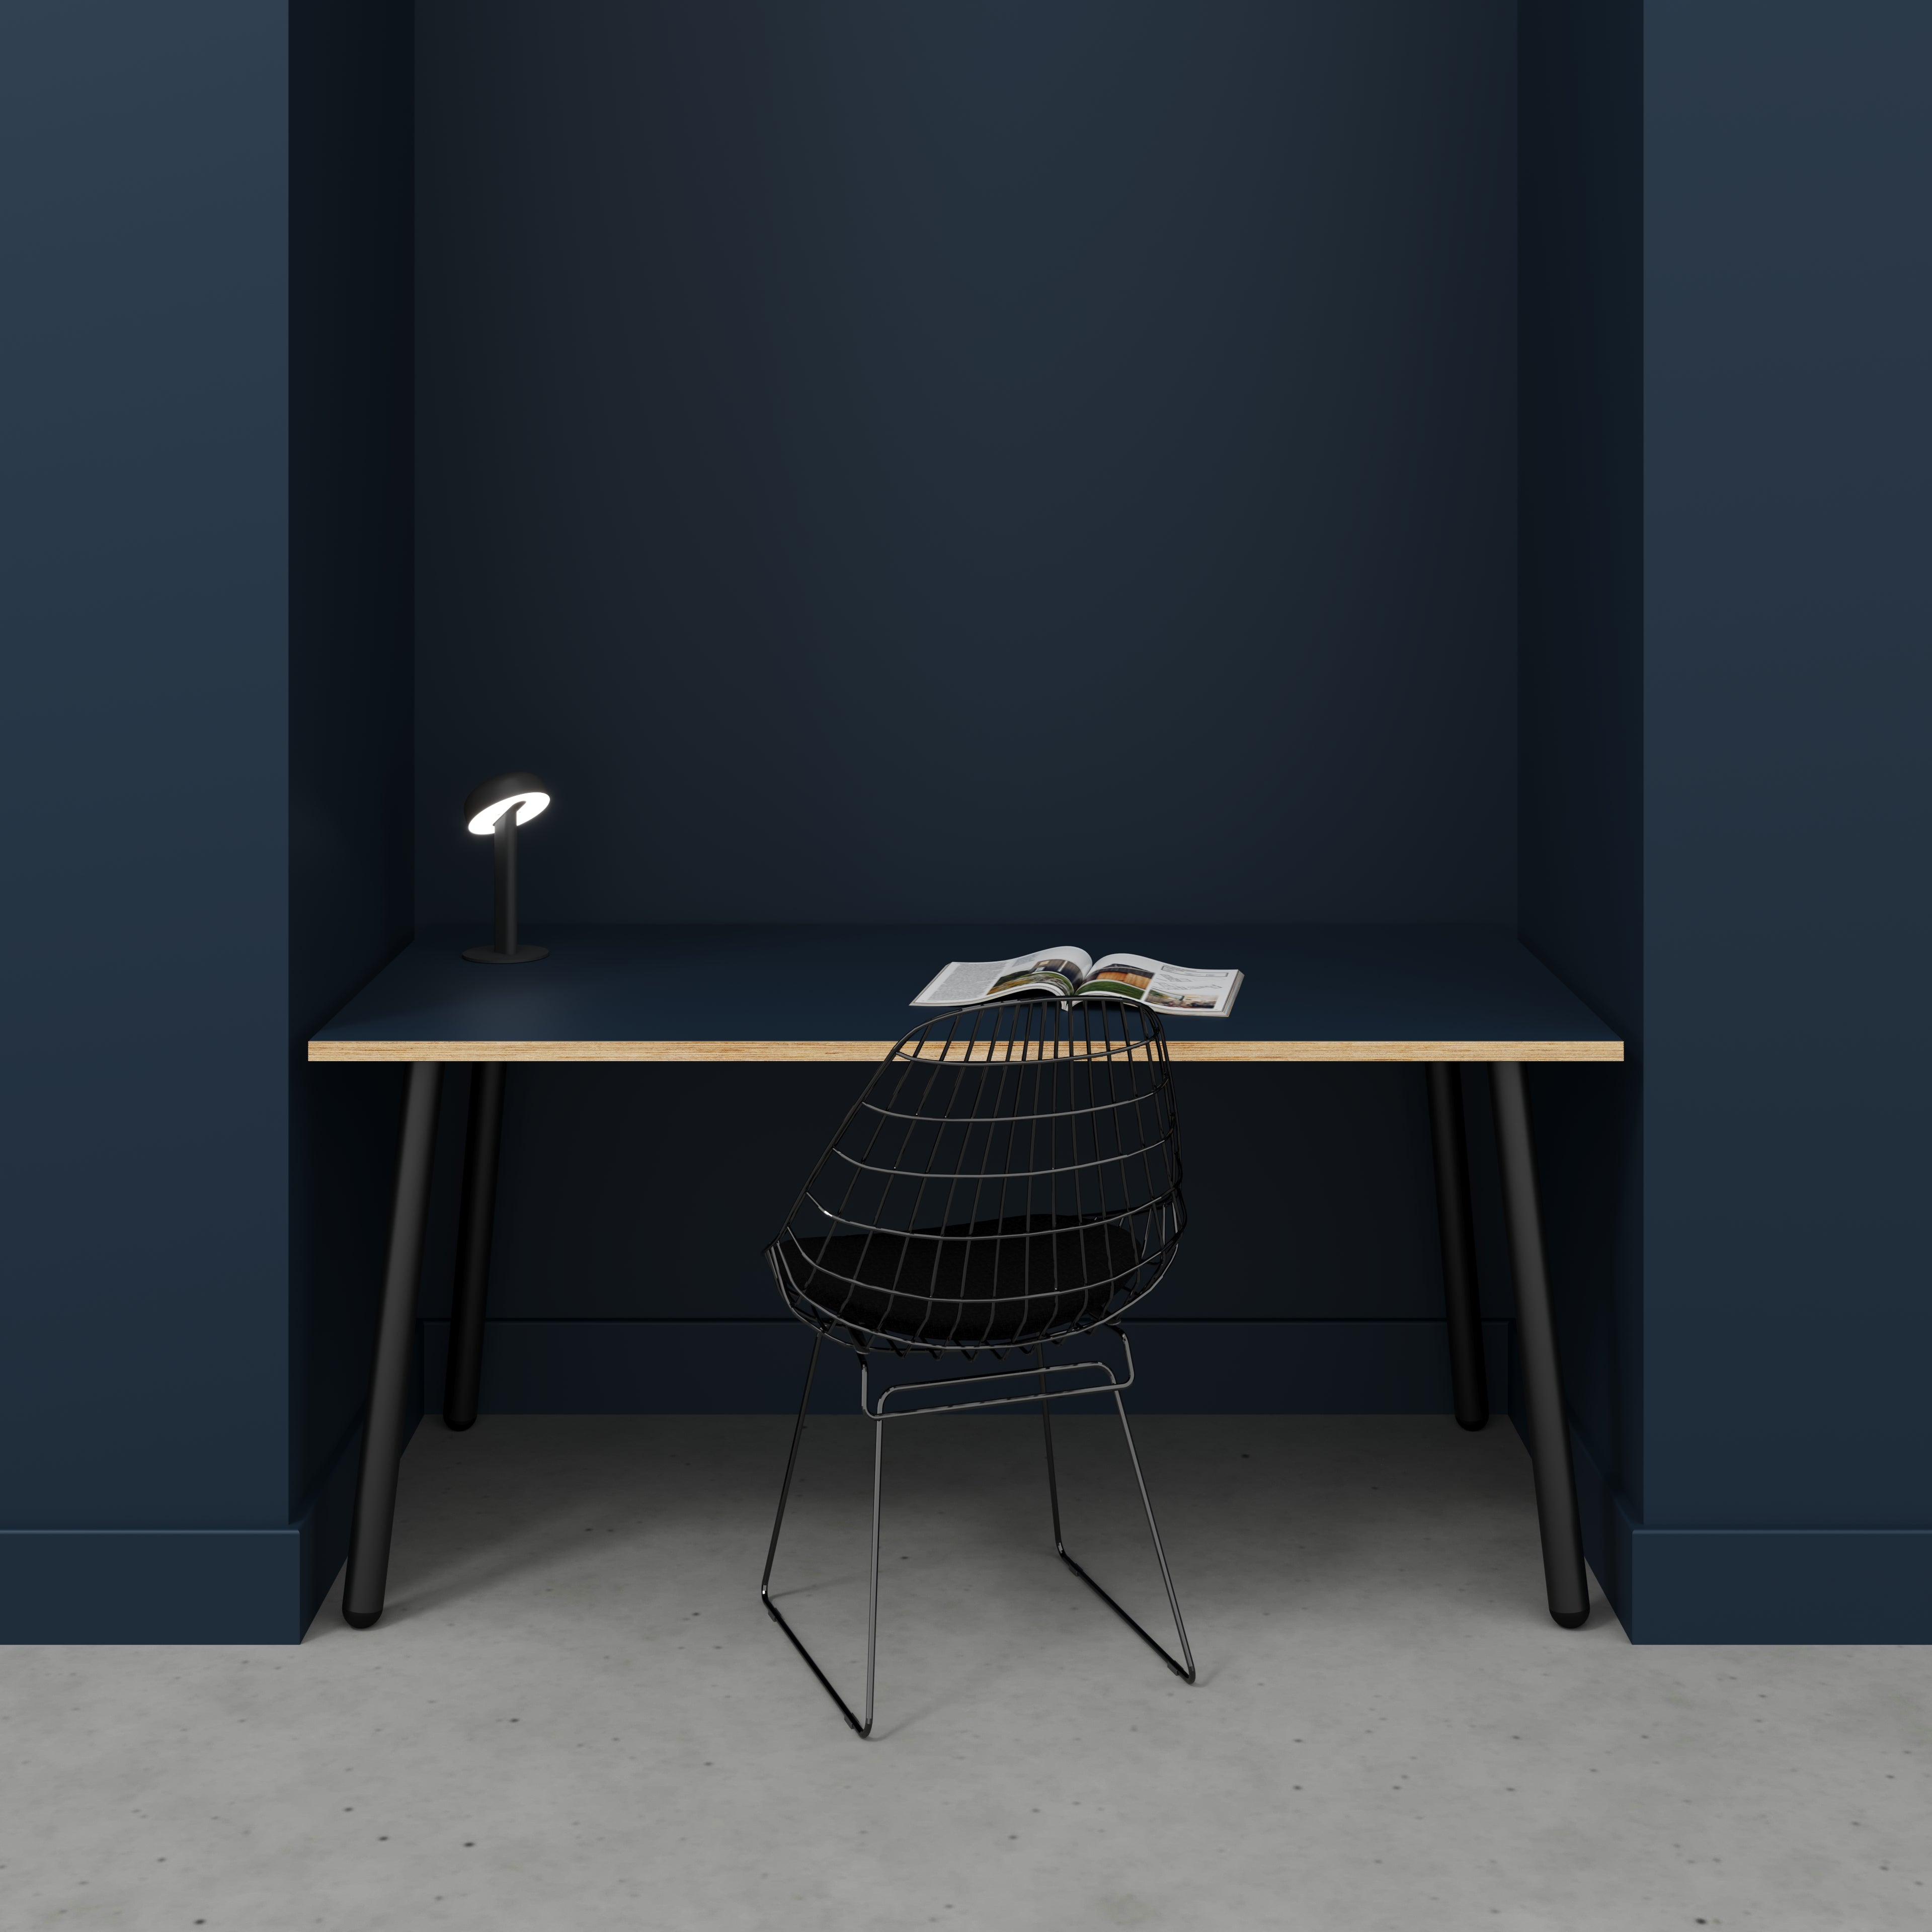 Desk with Black Round Single Pin Legs - Formica Night Sea Blue - 1600(w) x 800(d) x 735(h)